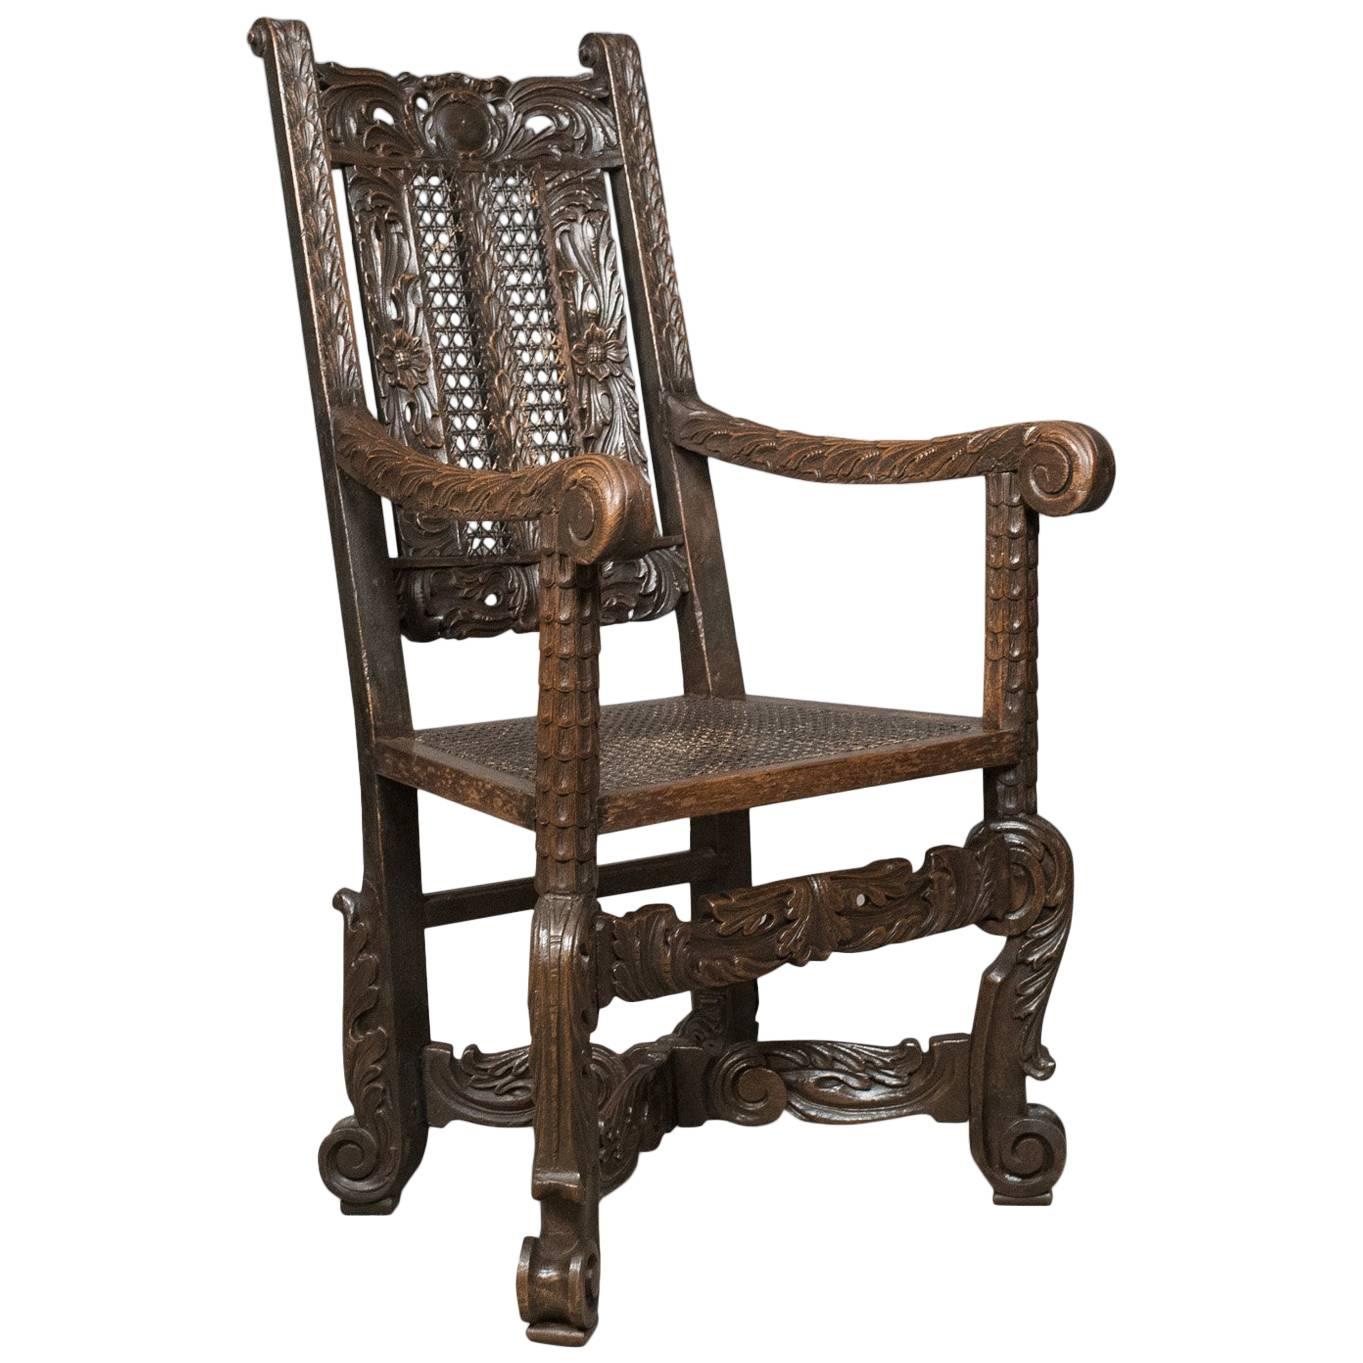 Antique Armchair, Victorian Carved Side, Hall Chair, English, Oak, circa 1880